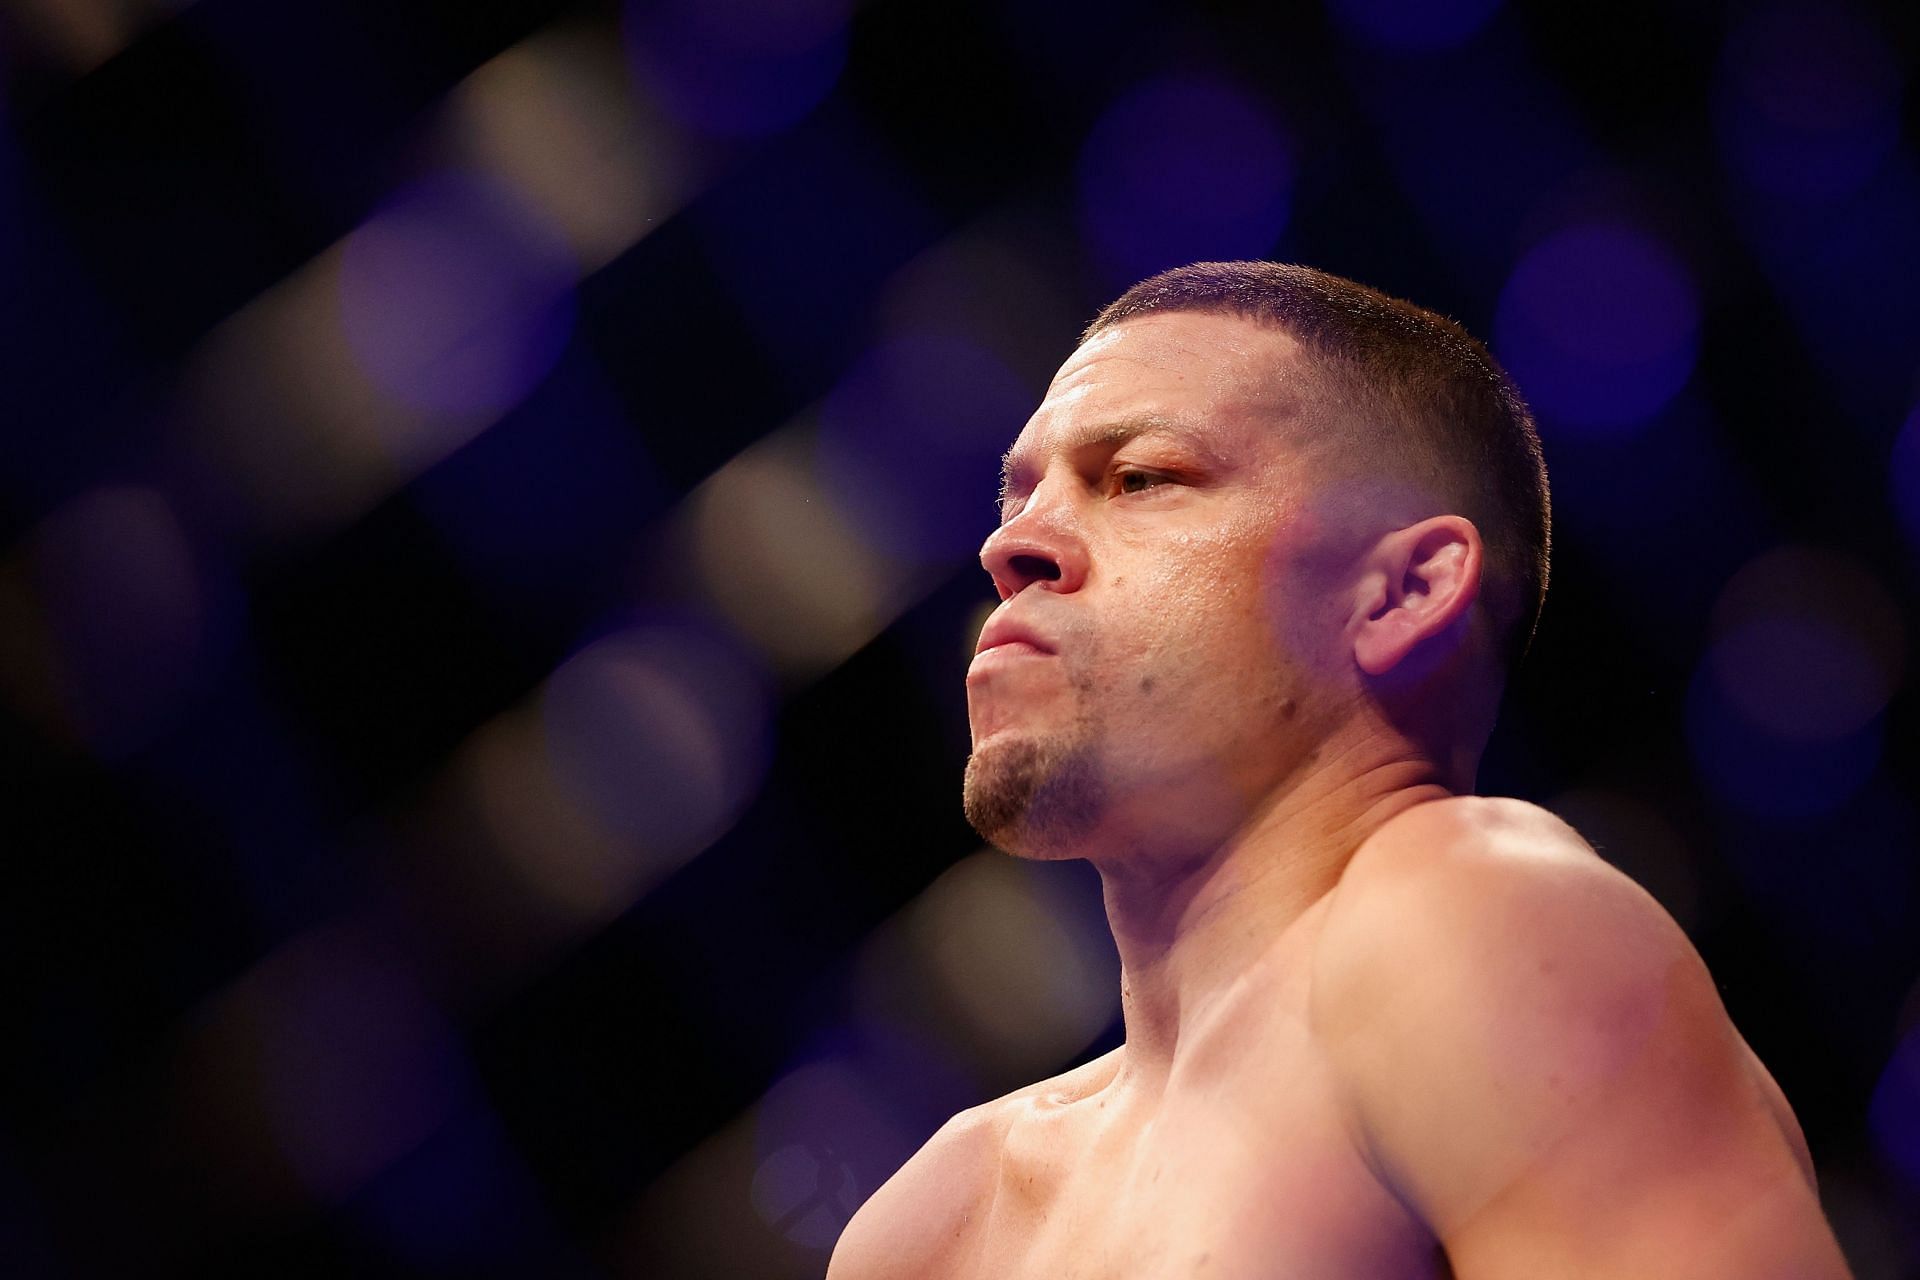 Nate Diaz is not currently ranked in the welterweight division